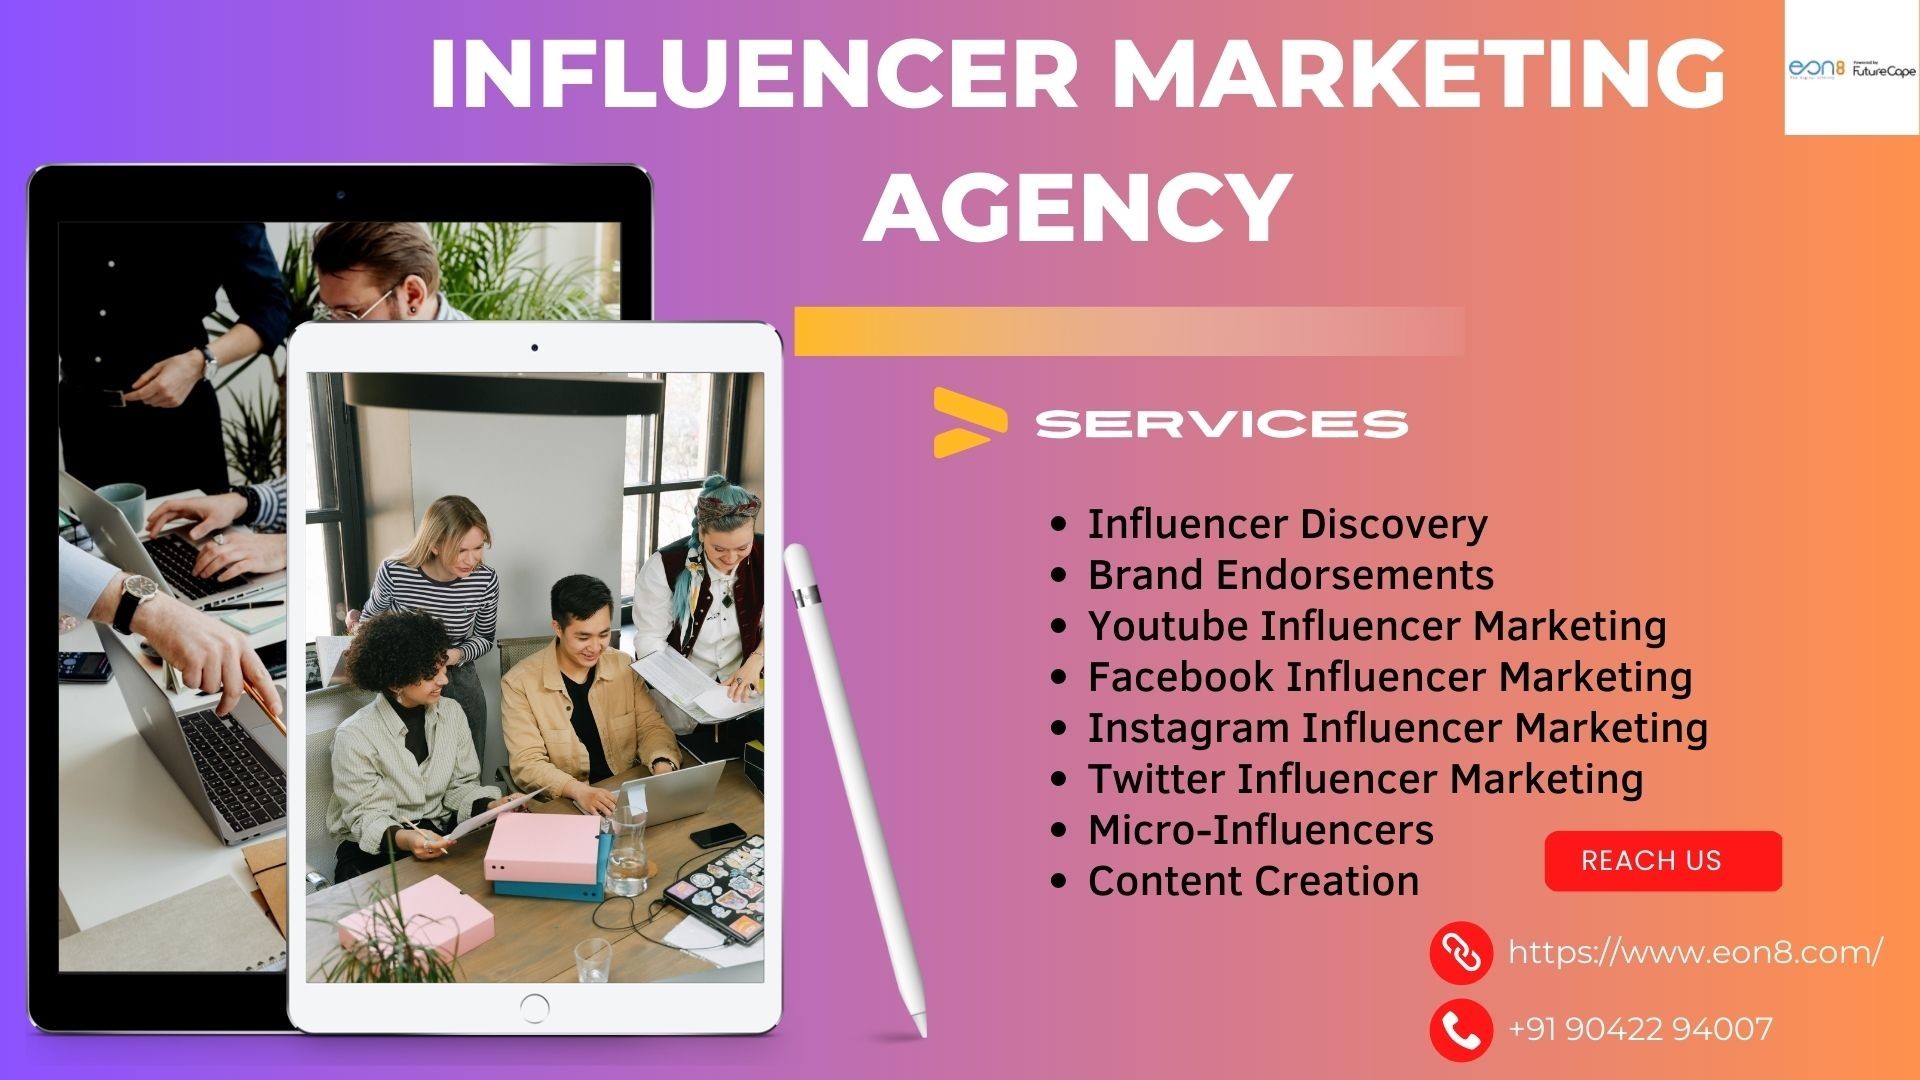 Influencer marketing services agency